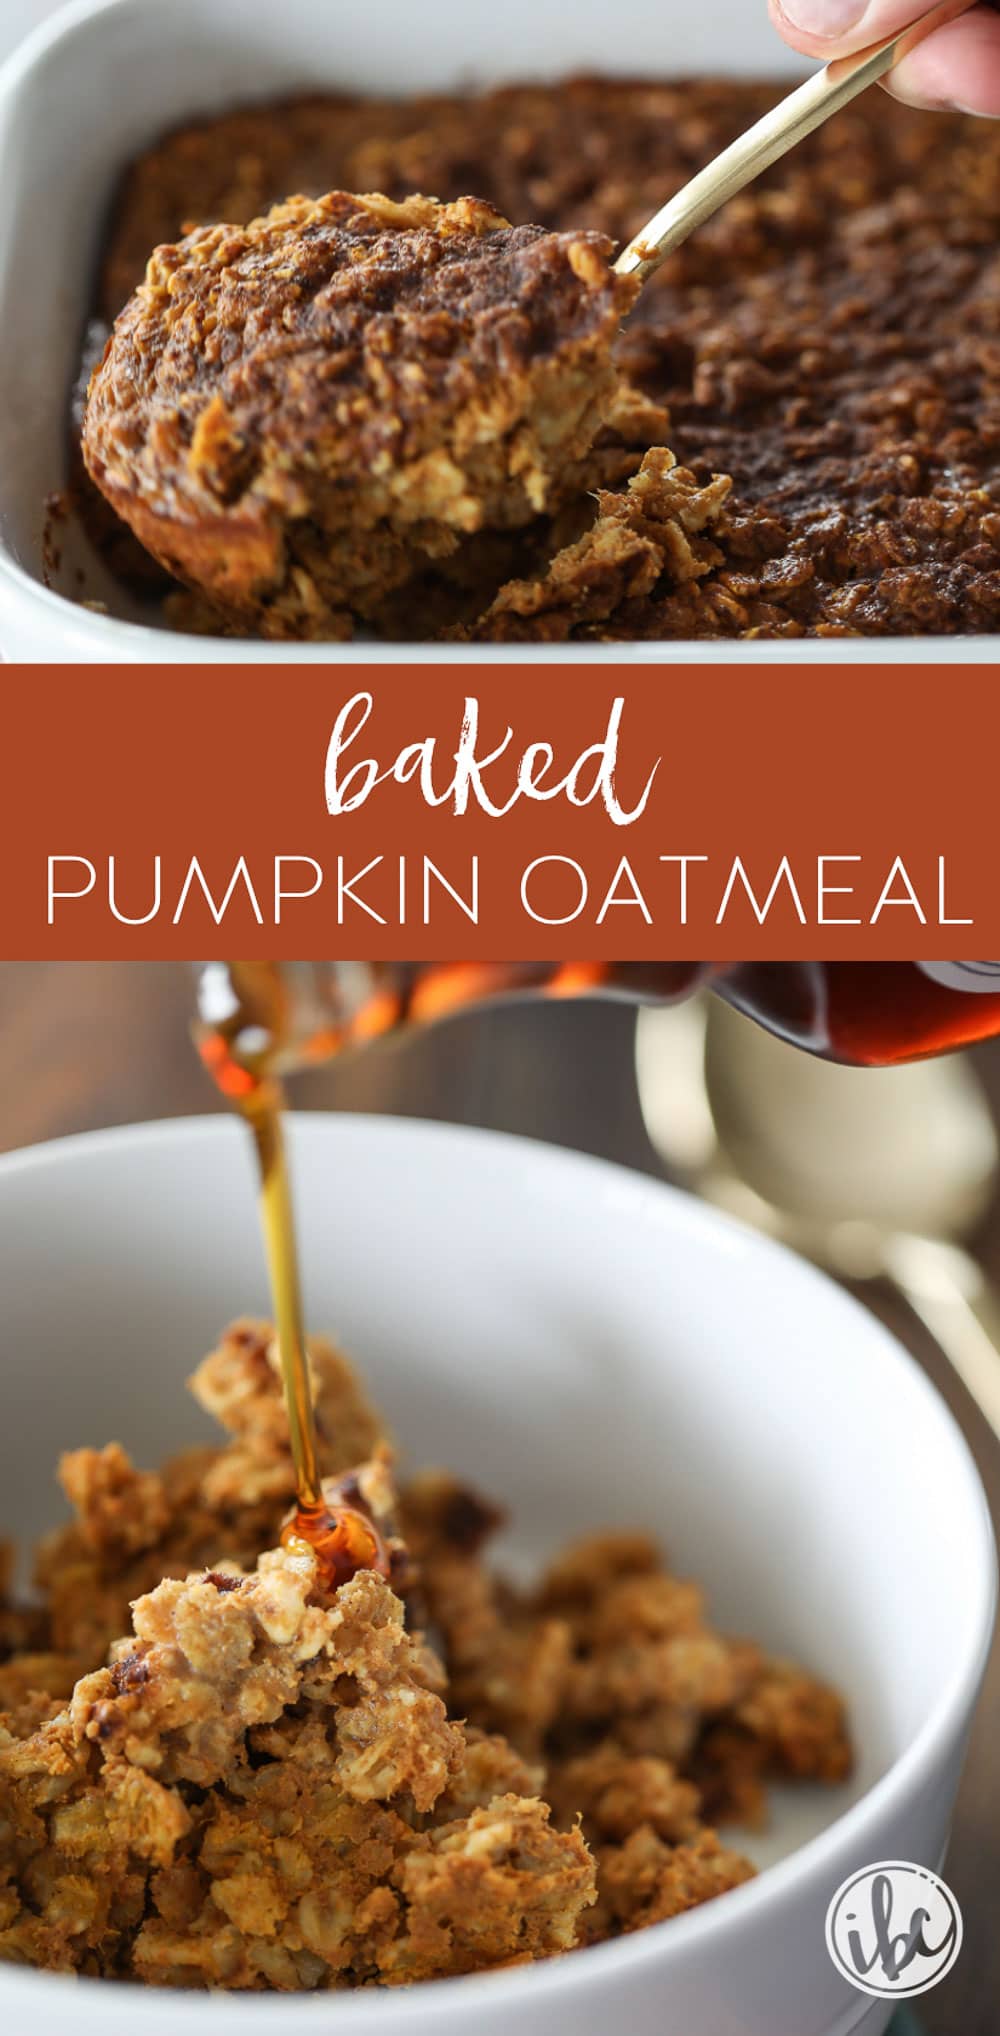 This Baked Pumpkin Spice Oatmeal recipe is the perfect breakfast idea for Fall. #pumpkin #oatmeal #fall #breakfast #recipe #pumpkinspice